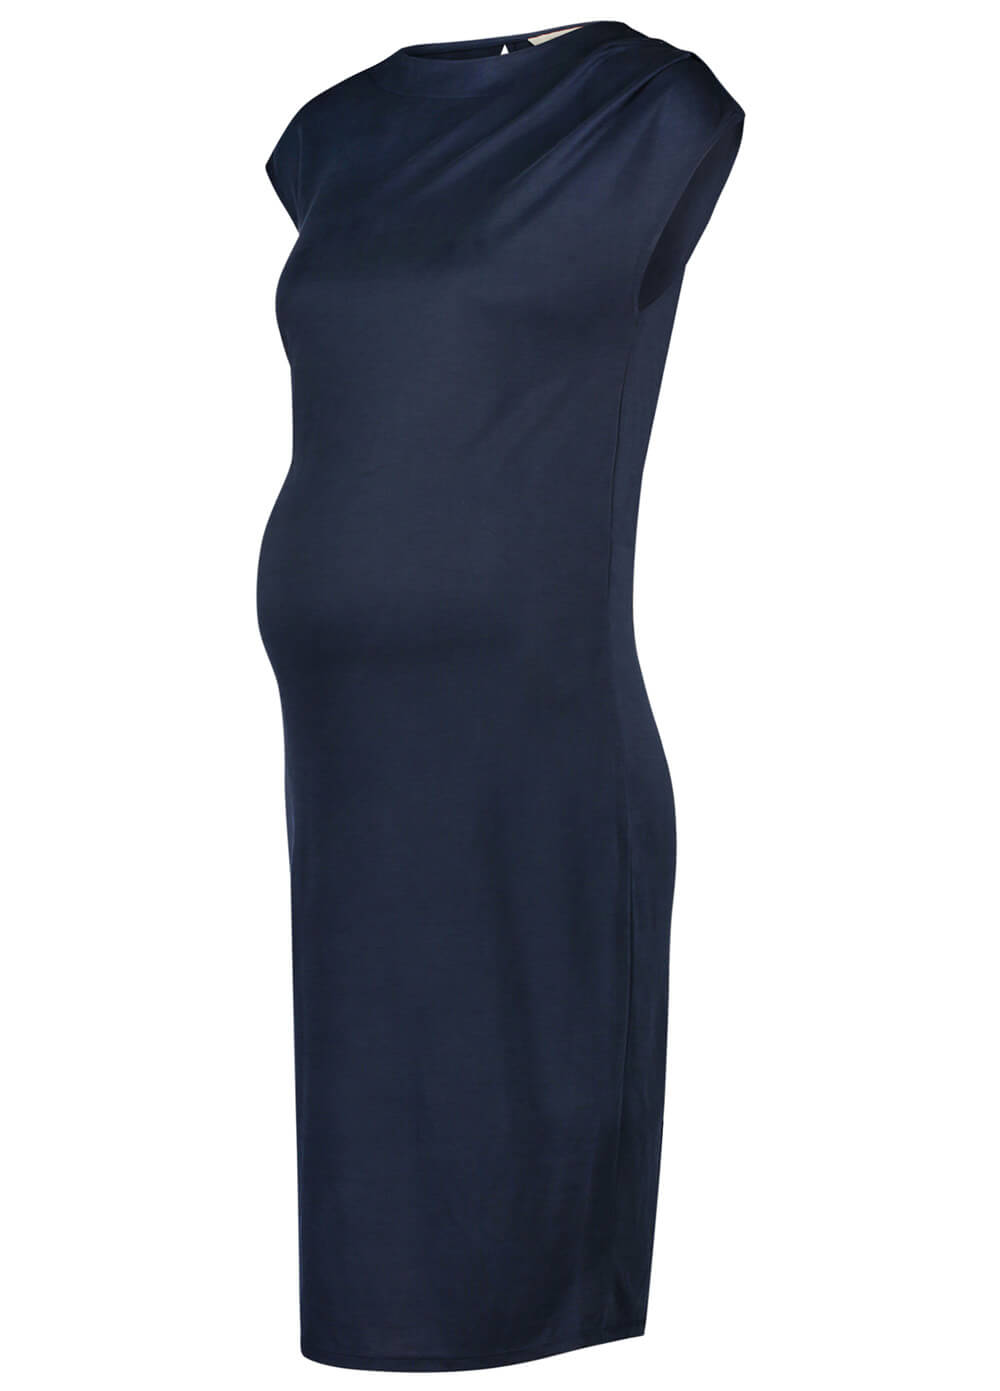 Annefleur Maternity Dress in Navy by Noppies